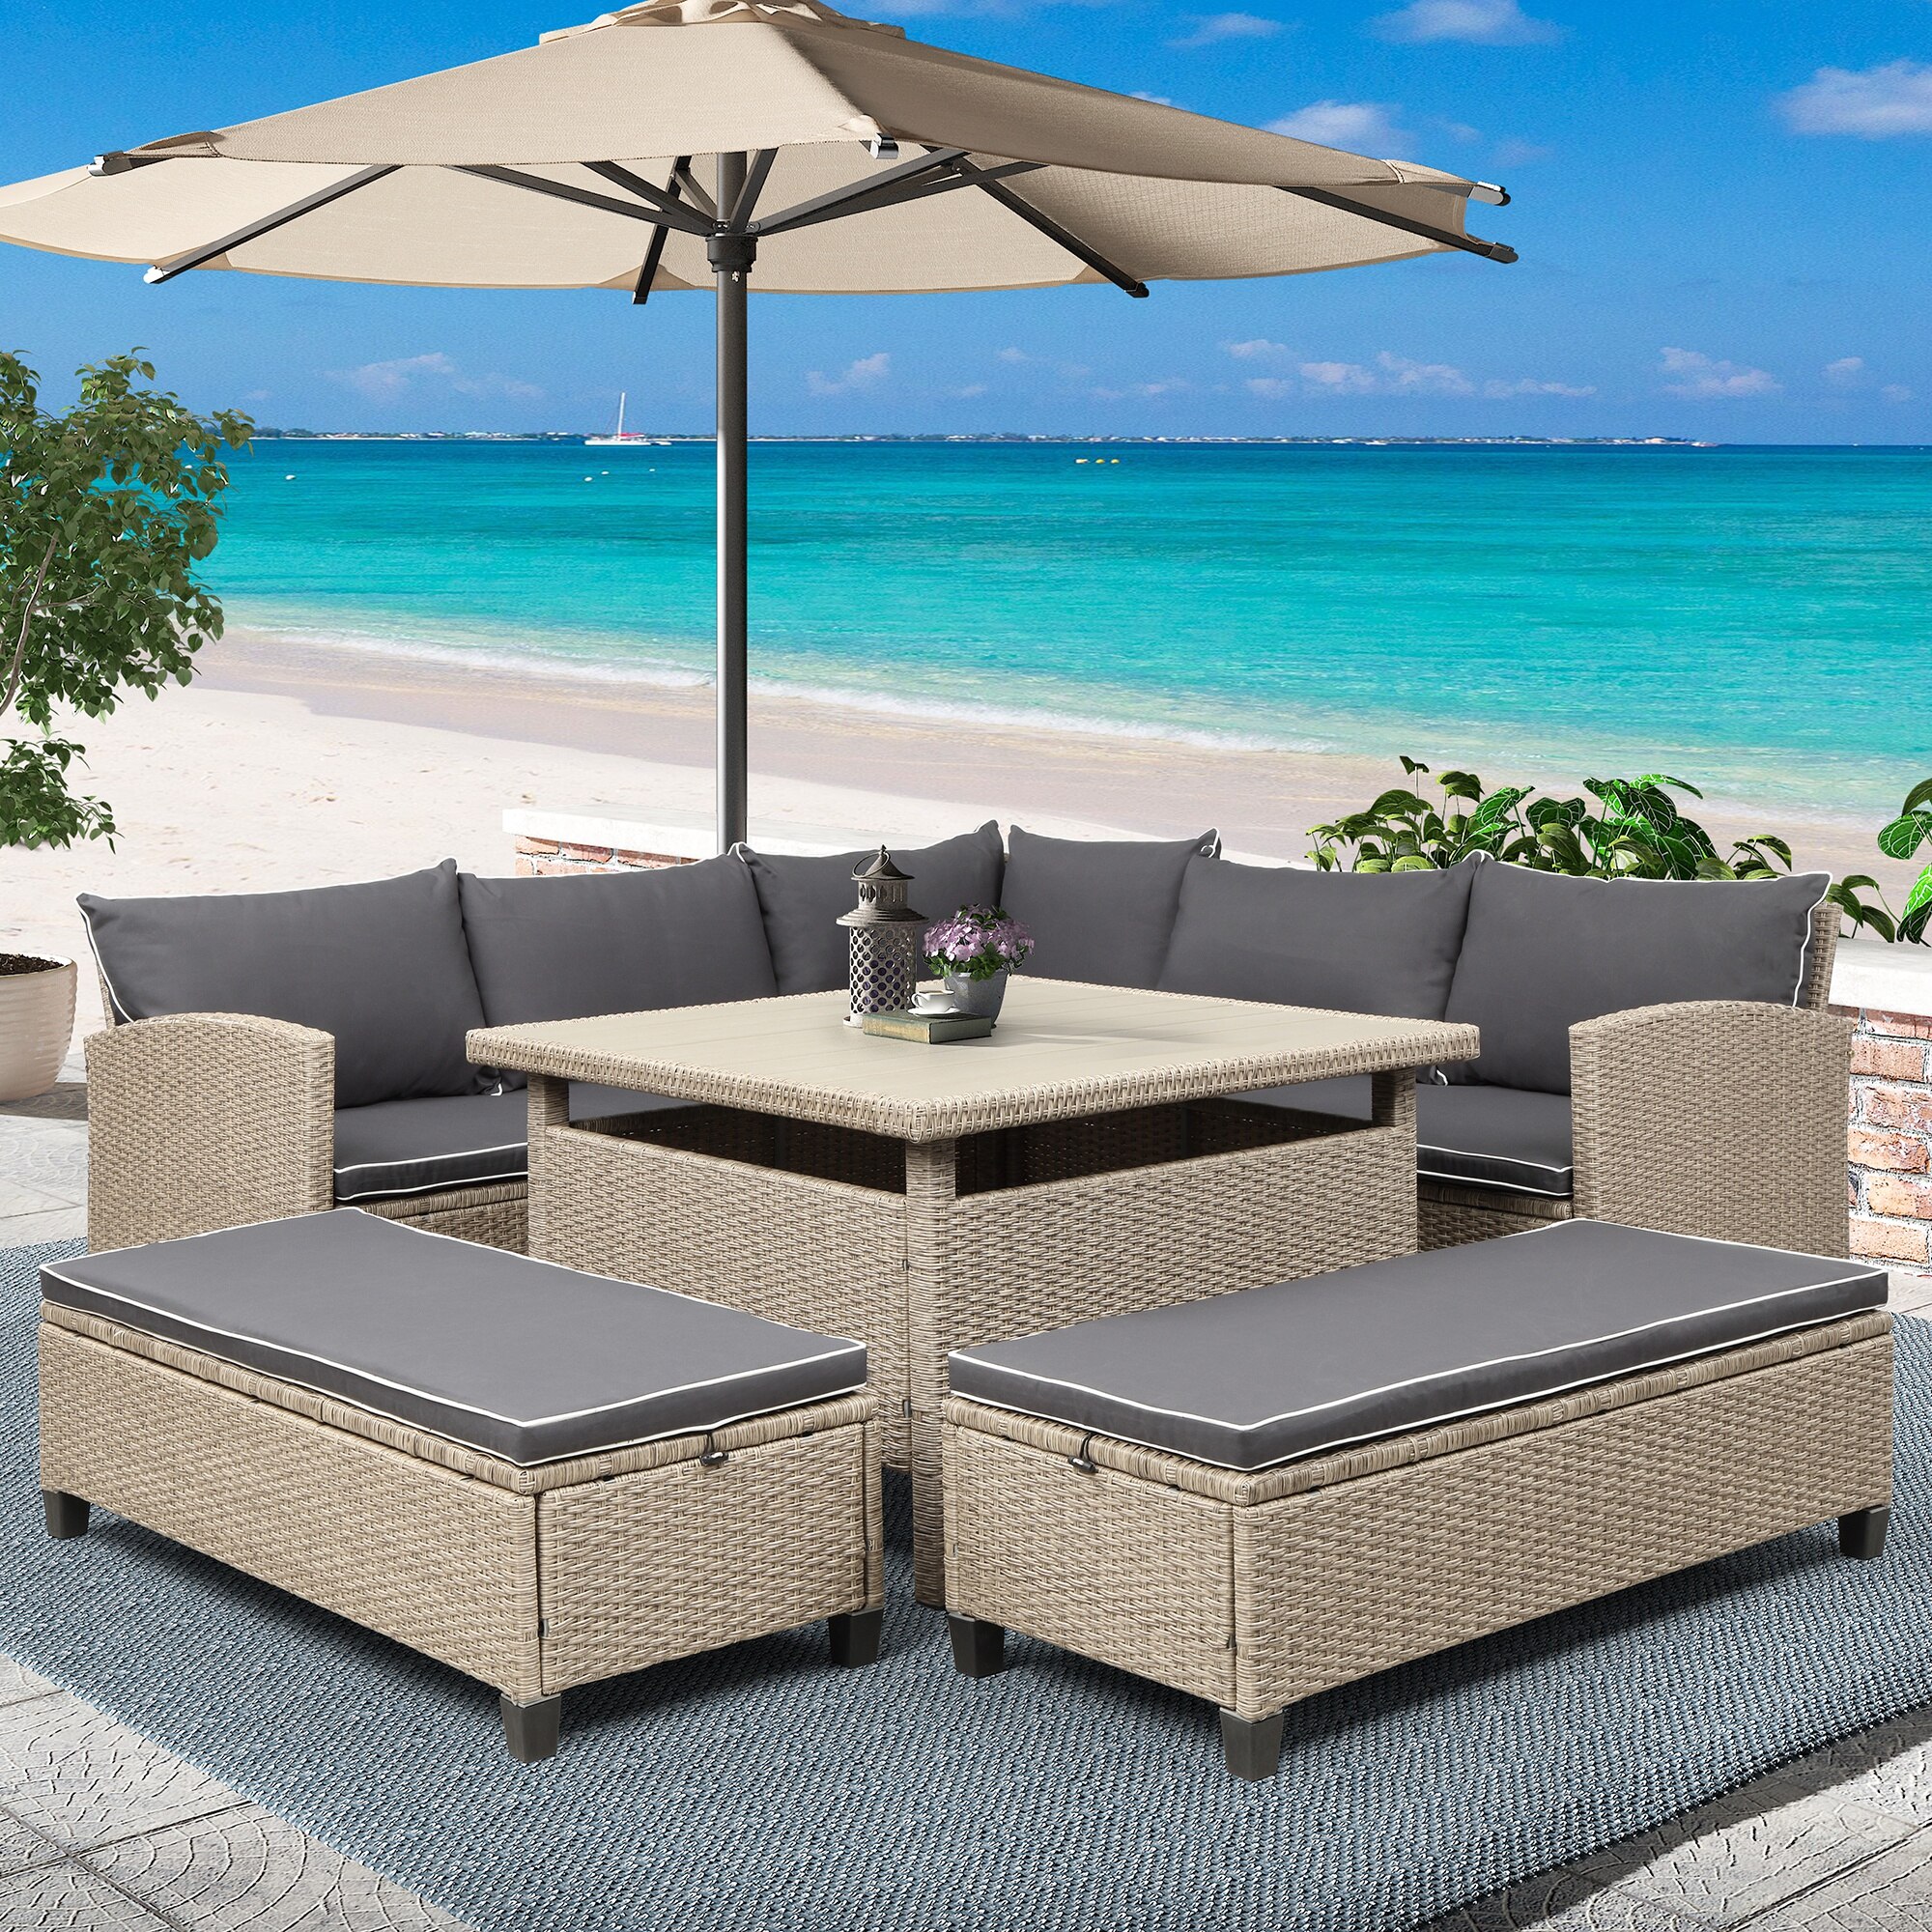 6-Piece Patio Furniture Set Outdoor Wicker Rattan Sectional Sofa With Table And Benches For Backyard Garden Poolside 4